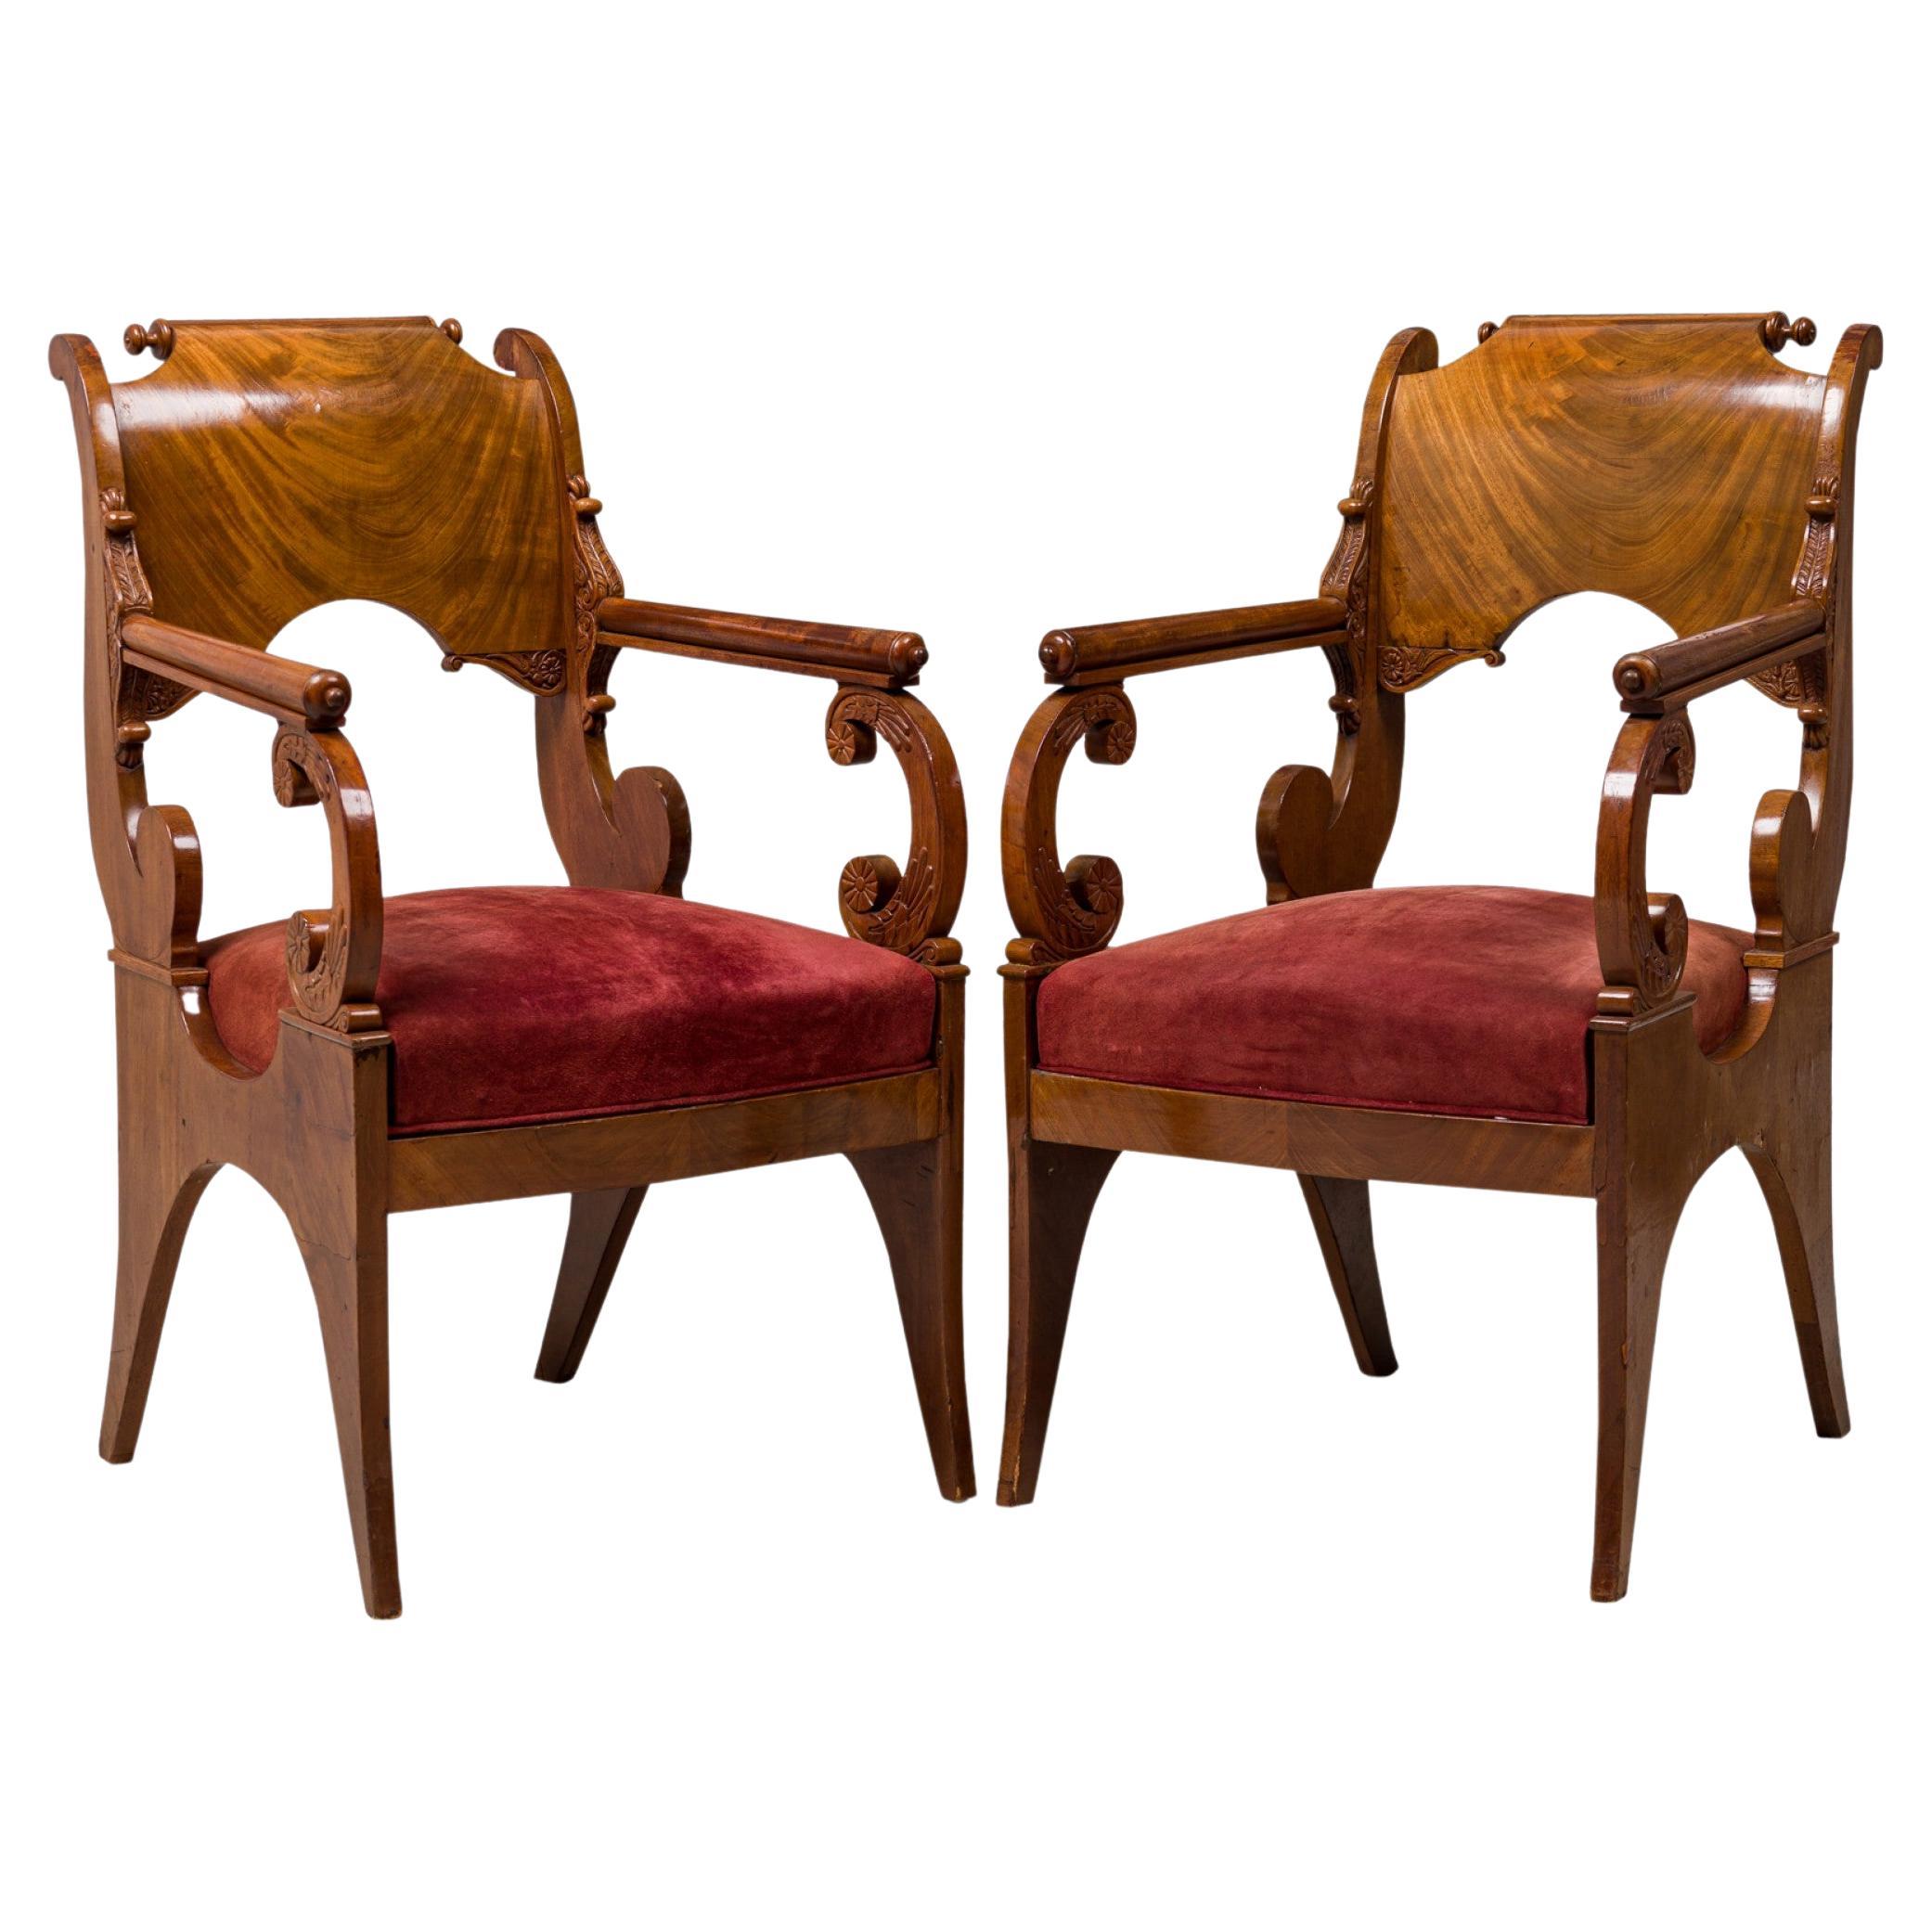 Set of 4 Russian Neoclassic Mahogany Scroll Form Red Upholstered Armchairs